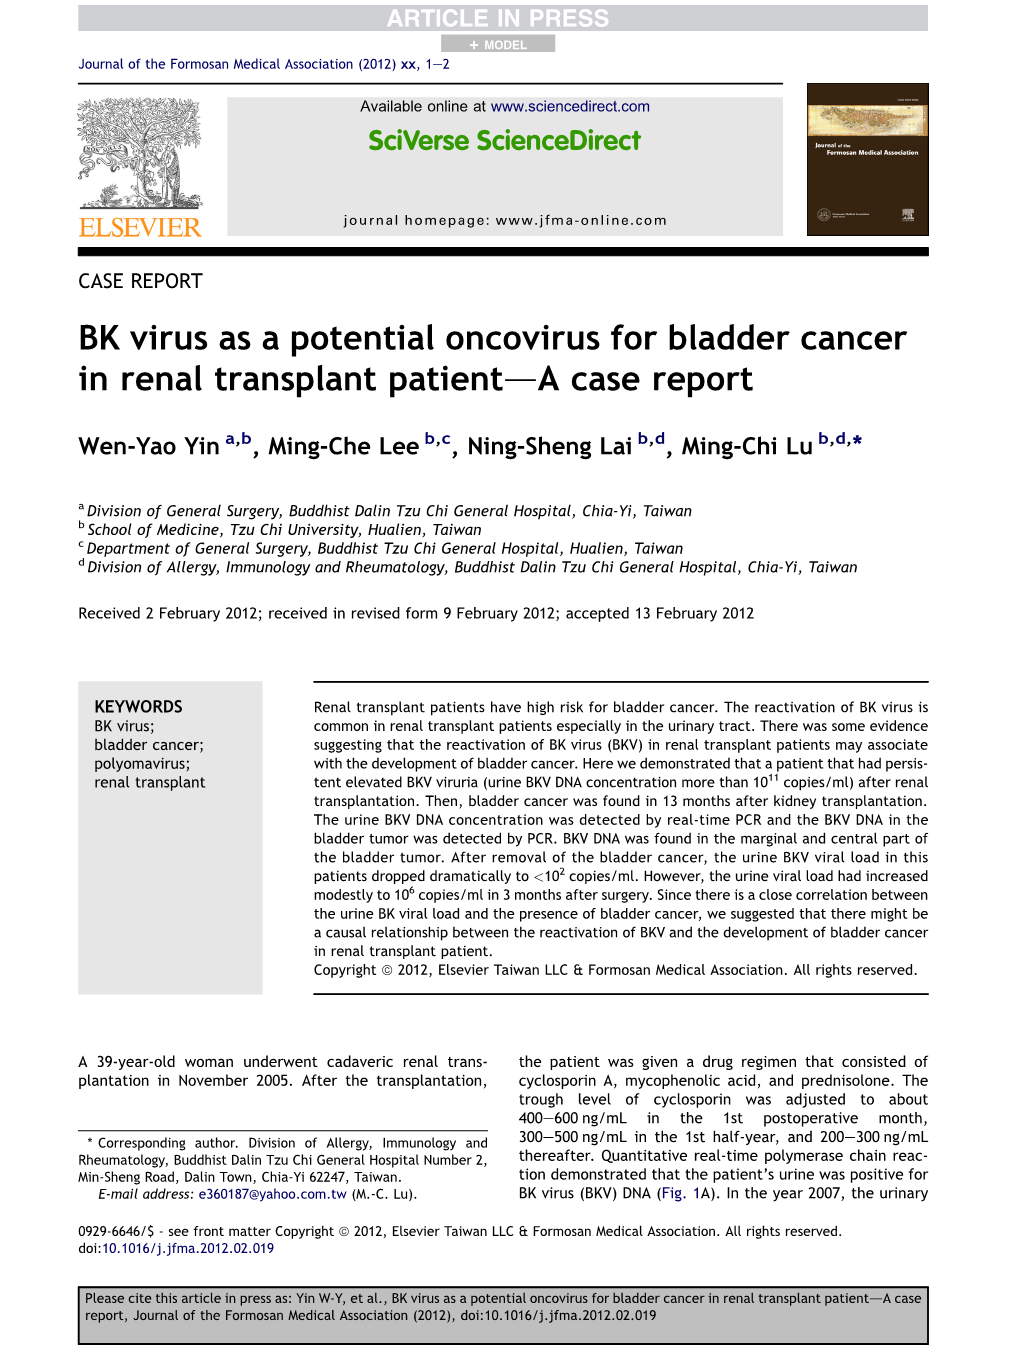 BK Virus As a Potential Oncovirus for Bladder Cancer in Renal Transplant Patient-A Case Report